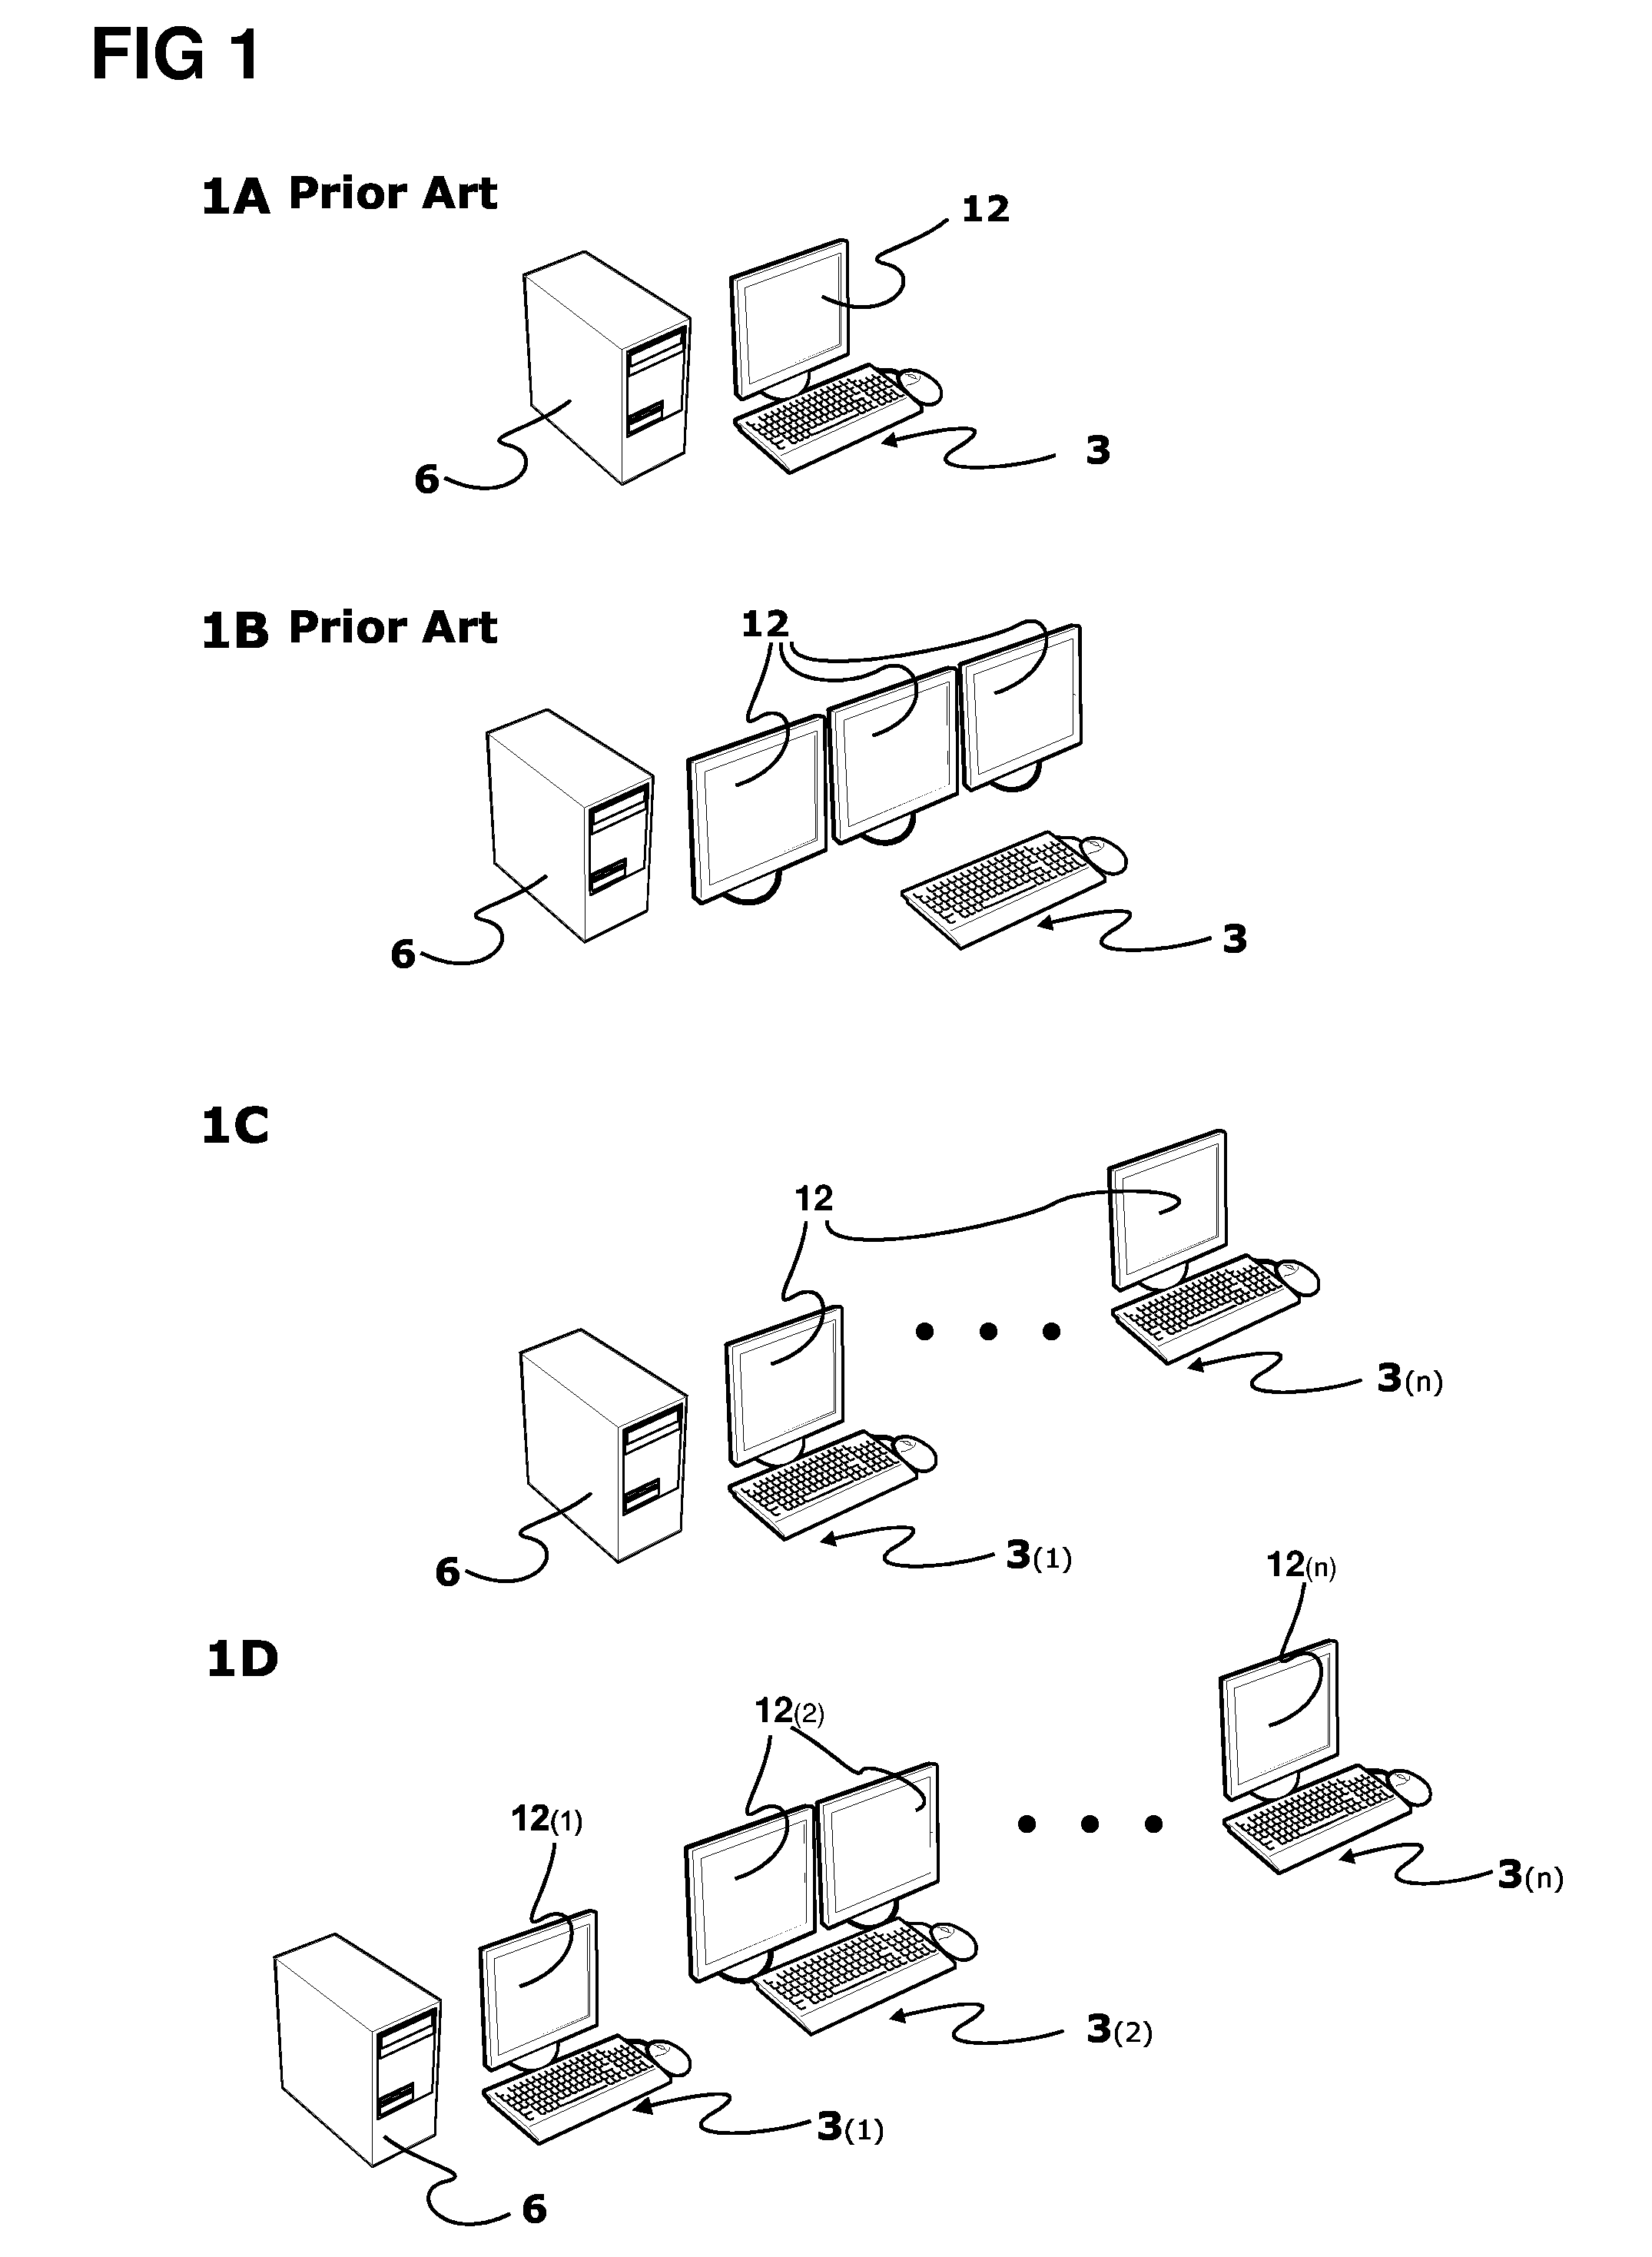 Method of operating multiple input and output devices through a single computer